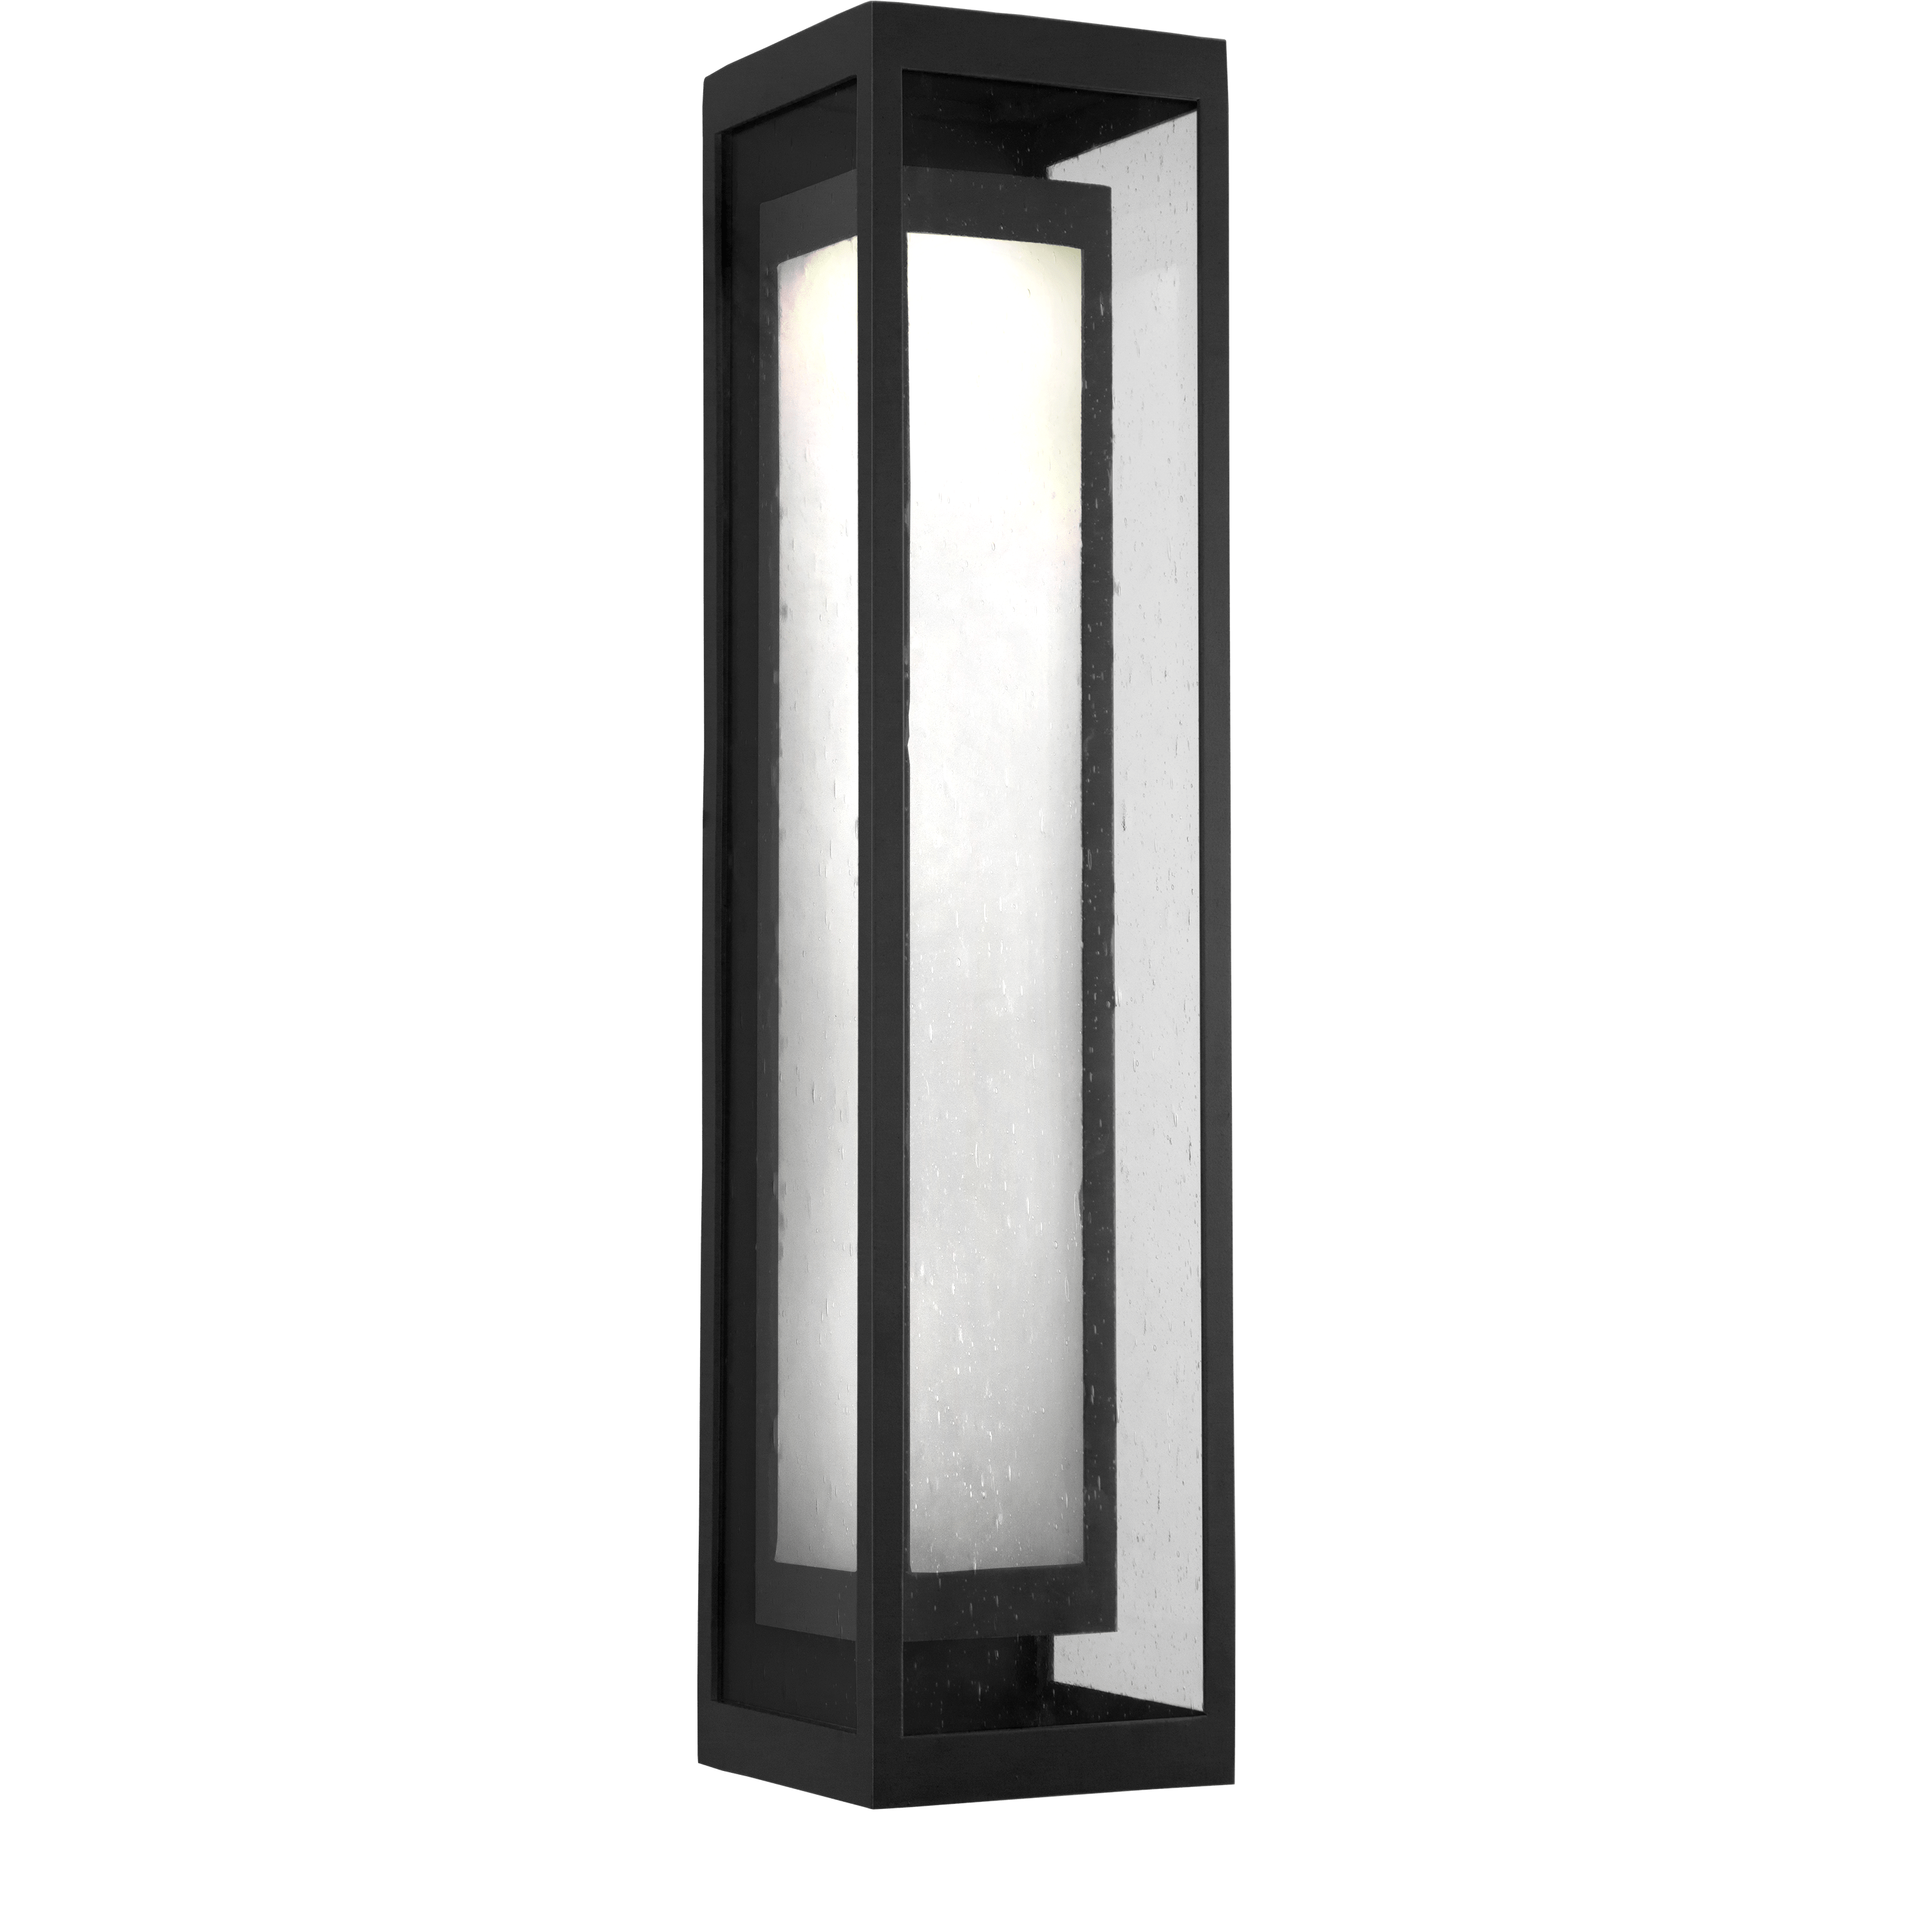 Box style outdoor sconce